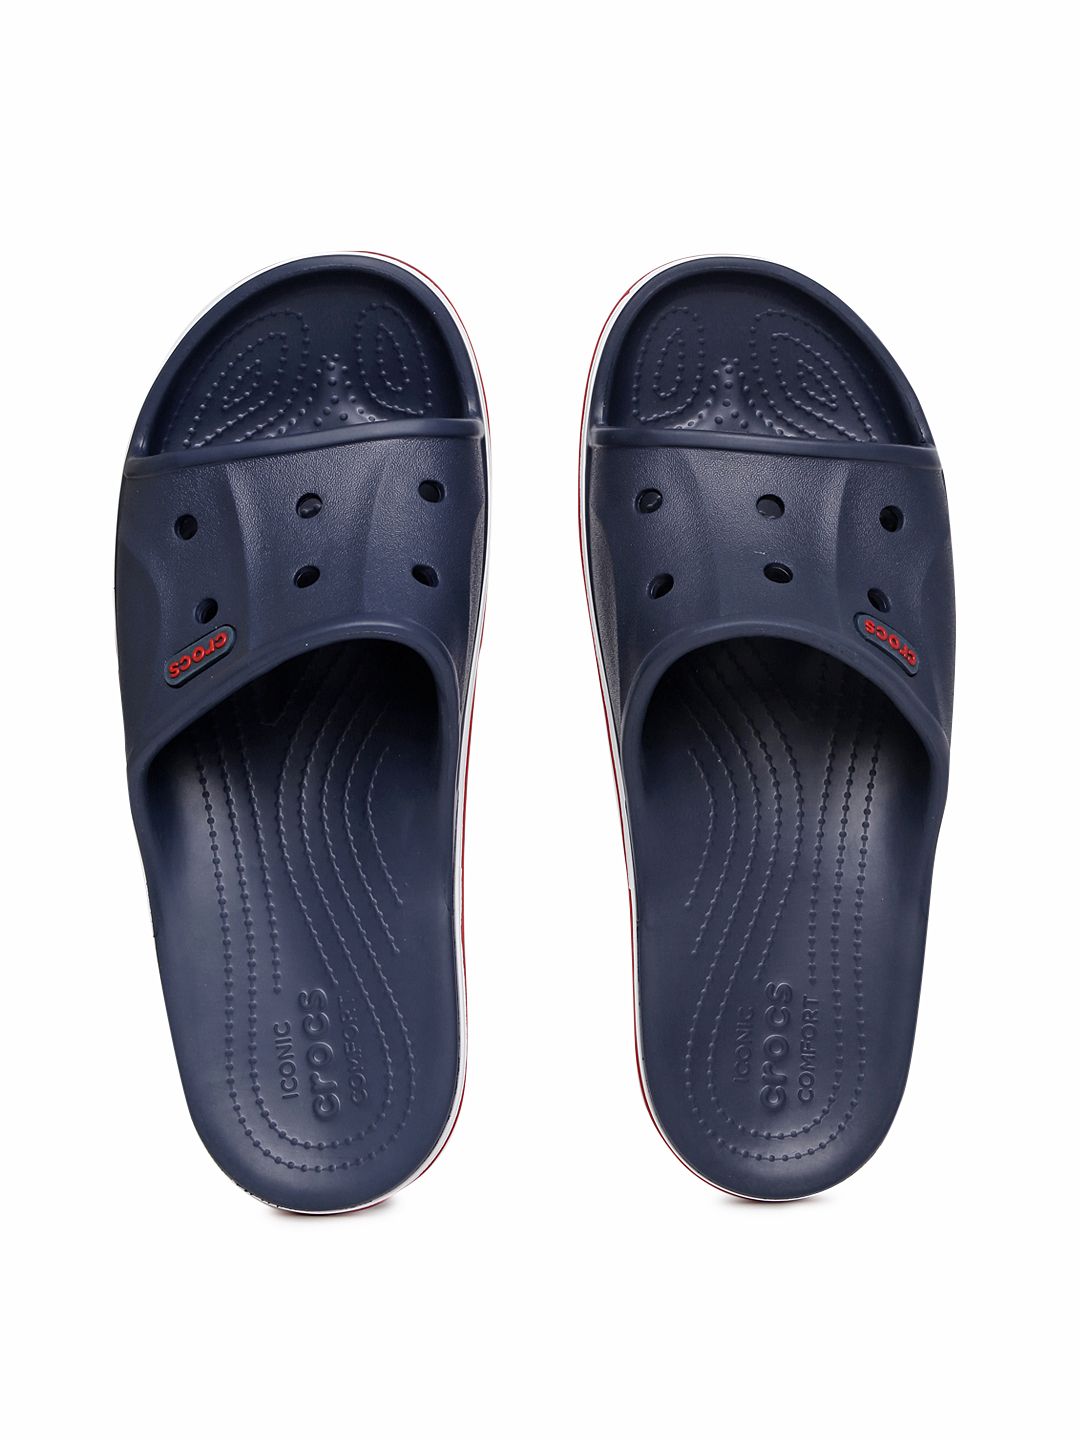 Crocs Unisex Navy Blue Solid Clogs Price in India